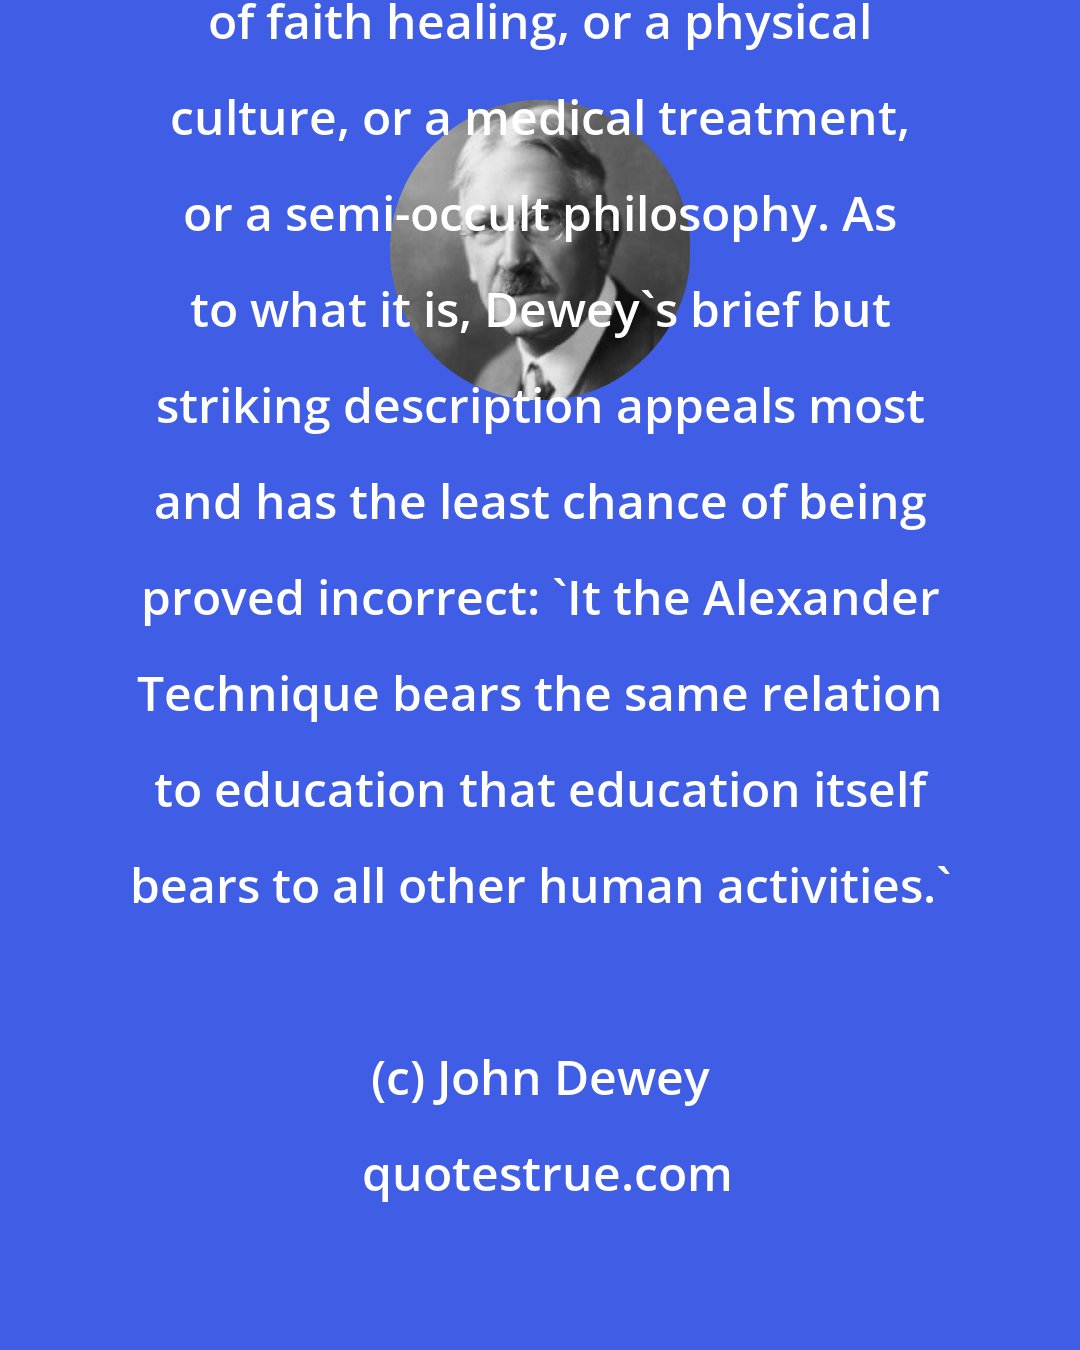 John Dewey: It is not a nature cure, a system of faith healing, or a physical culture, or a medical treatment, or a semi-occult philosophy. As to what it is, Dewey's brief but striking description appeals most and has the least chance of being proved incorrect: 'It the Alexander Technique bears the same relation to education that education itself bears to all other human activities.'